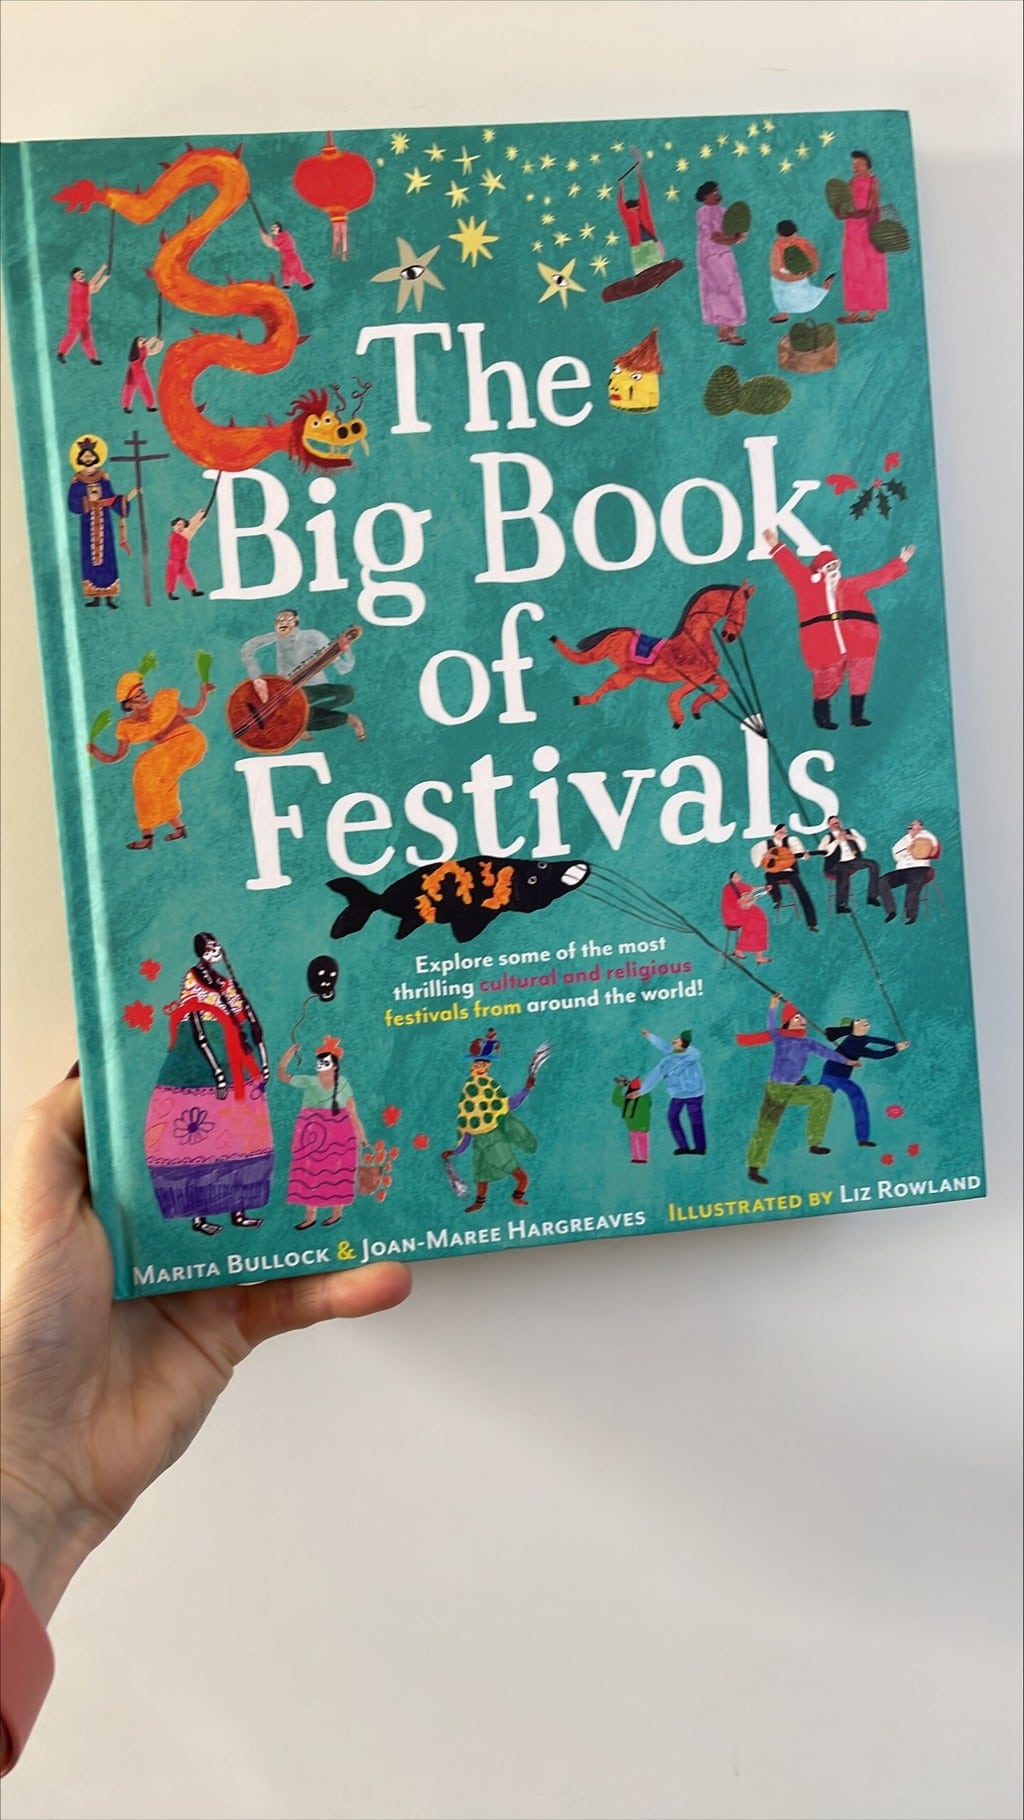 The Big Book of Festivals – Marita Bullock and Joan-Maree Hargreaves (authors), Liz Rowland (illustrator), Faber & Faber Limited (publisher)